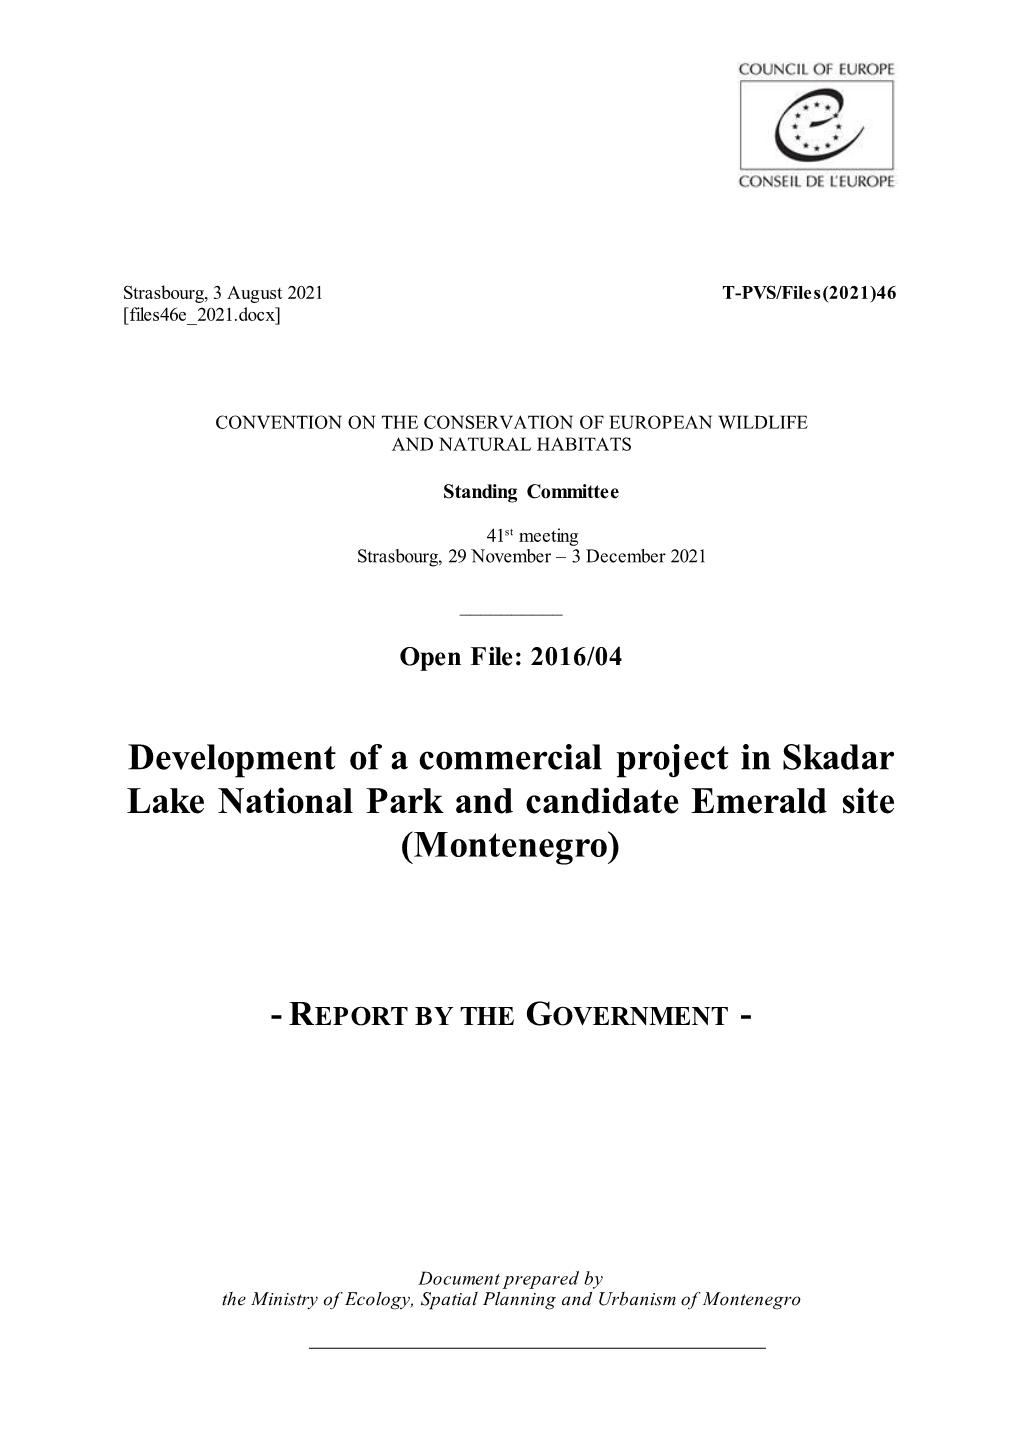 Development of a Commercial Project in Skadar Lake National Park and Candidate Emerald Site (Montenegro)